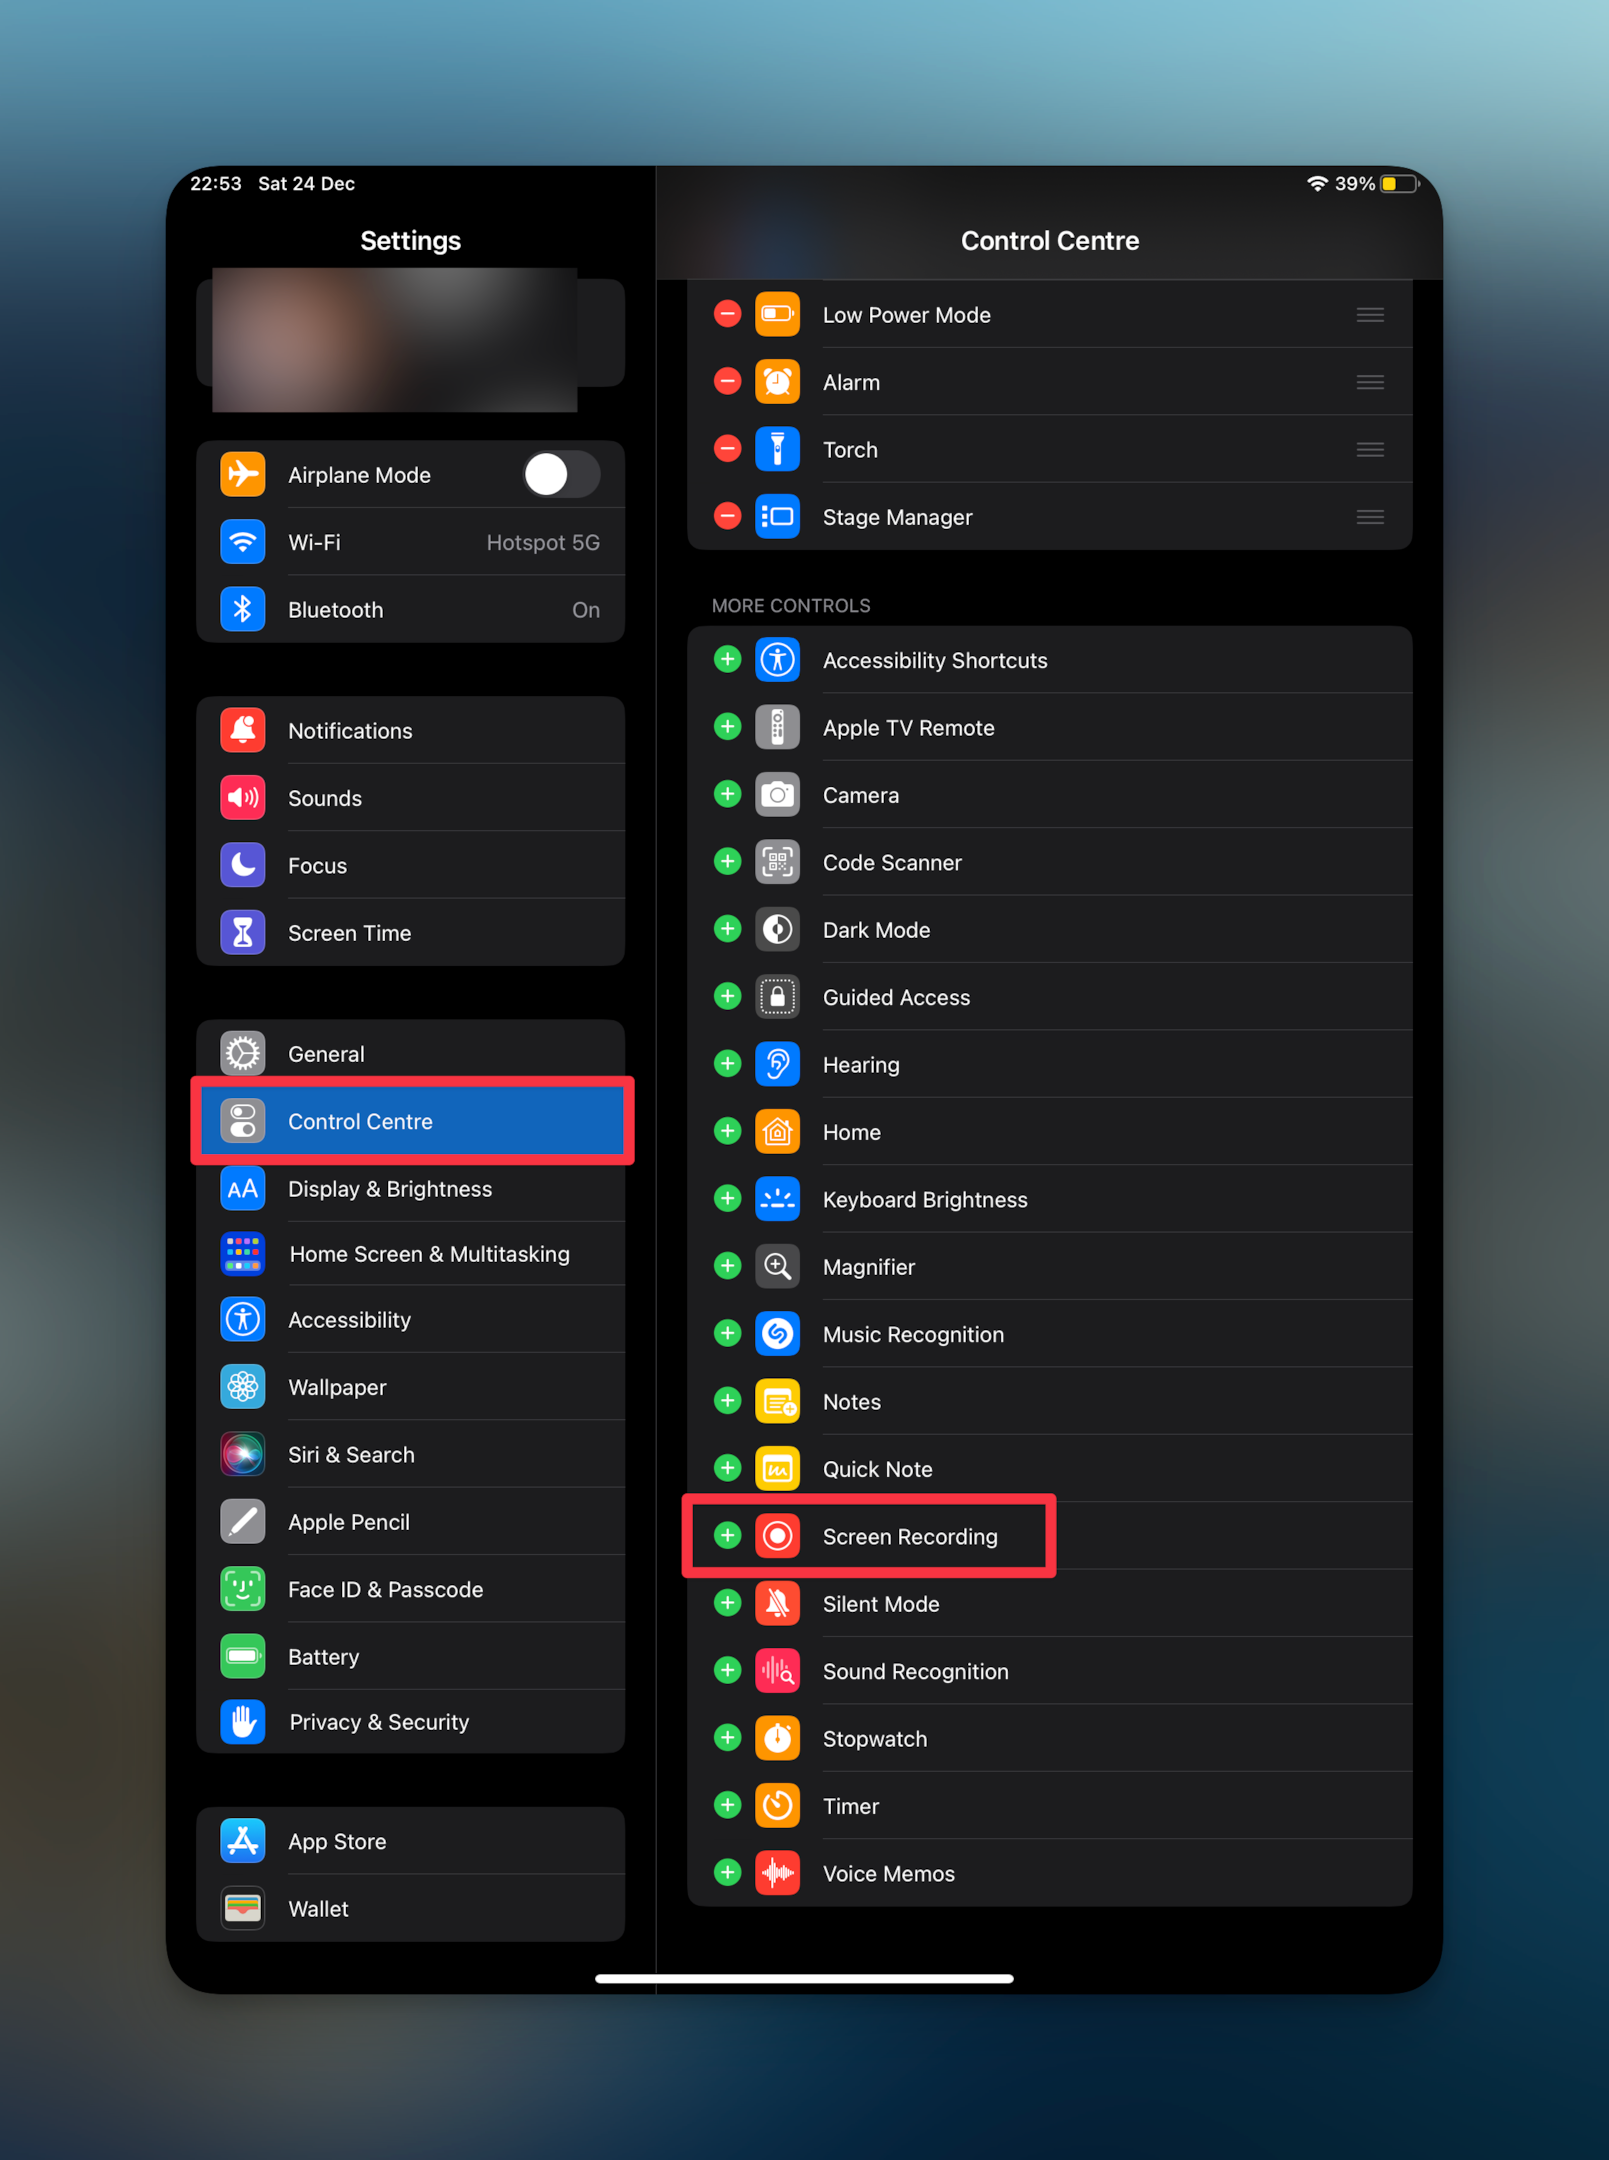 Remote.tools shows how to add screen recording to control center on iPad